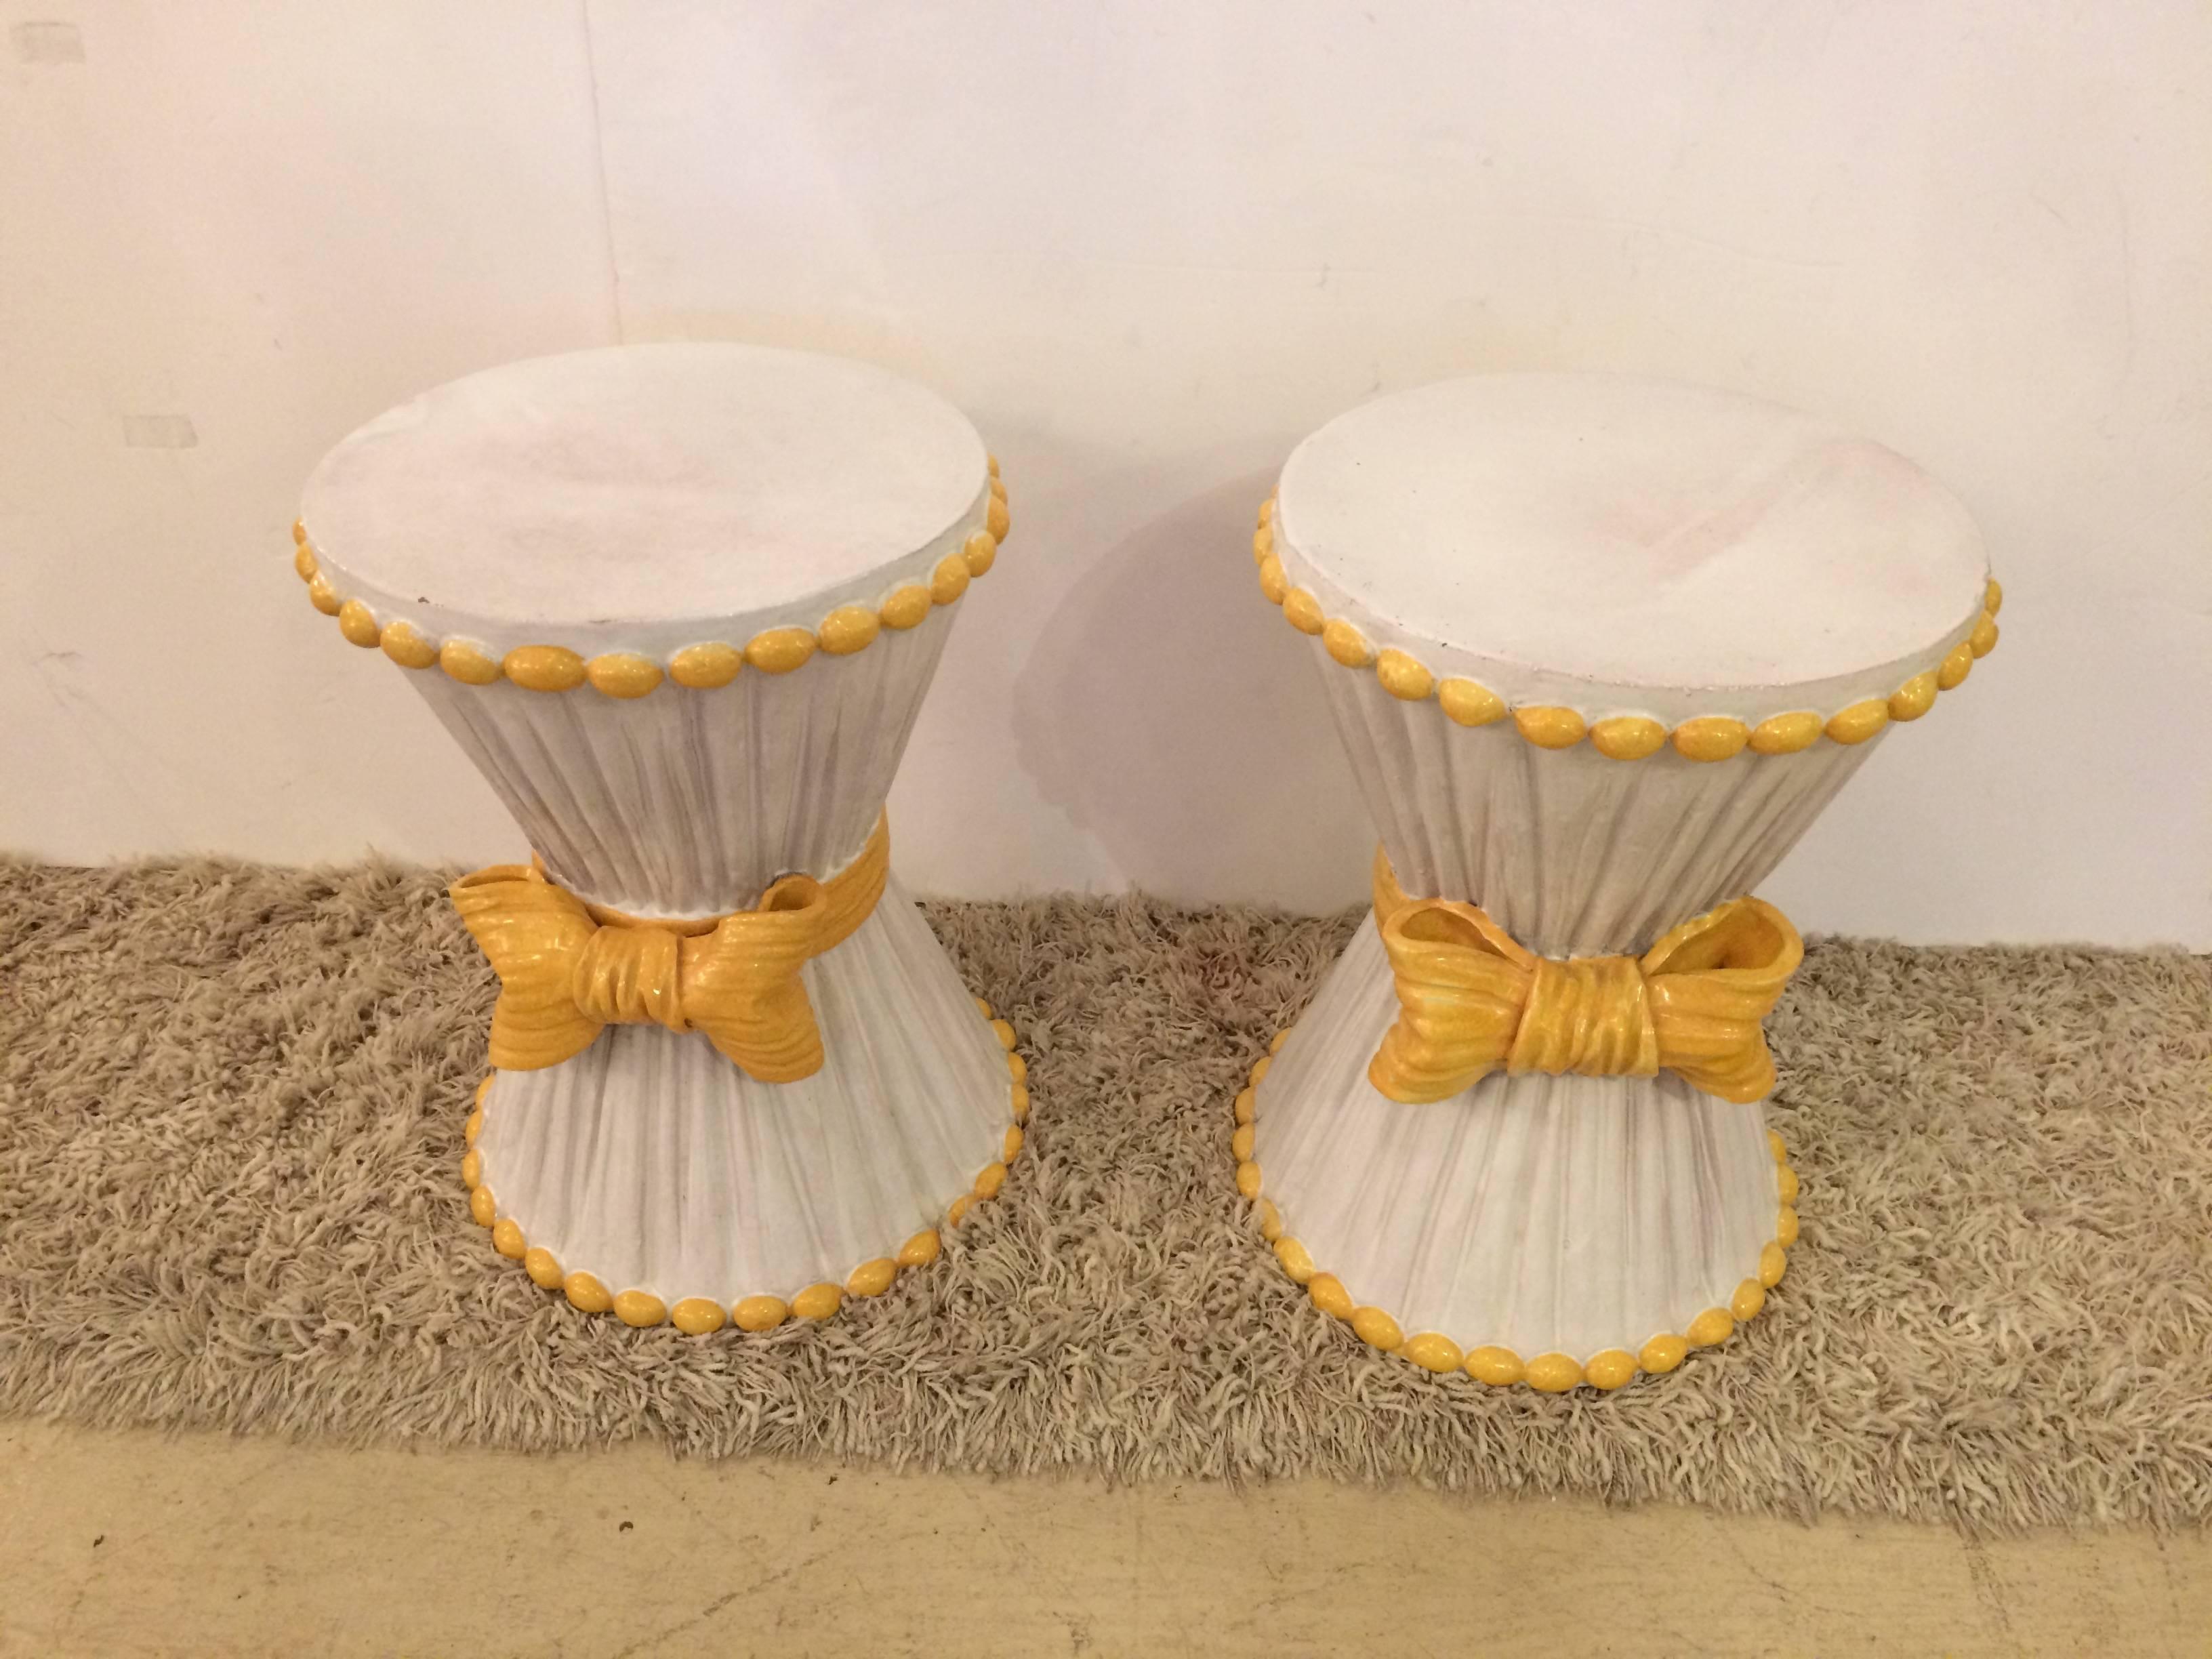 Two smashing cream colored midcentury Italian terra-cotta garden seats or occasional tables in hourglass shapes and adorable Provencal yellow details and bows on the front.